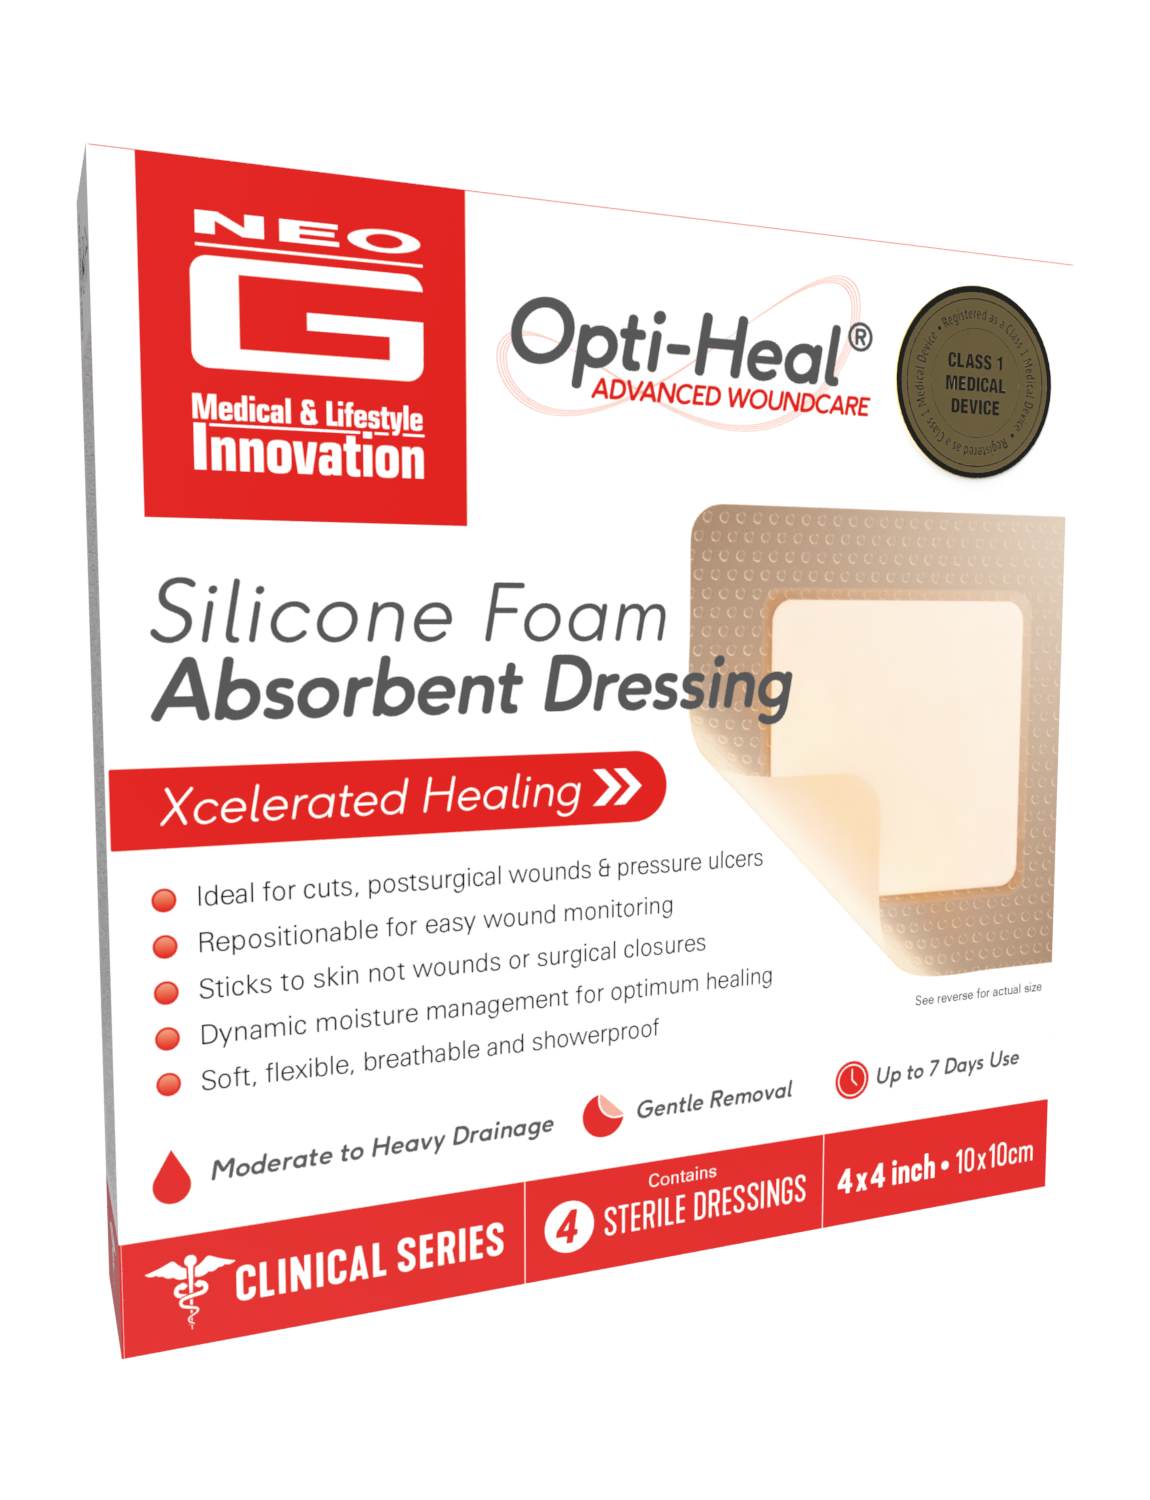 Silicone Foam Absorbent Dressing